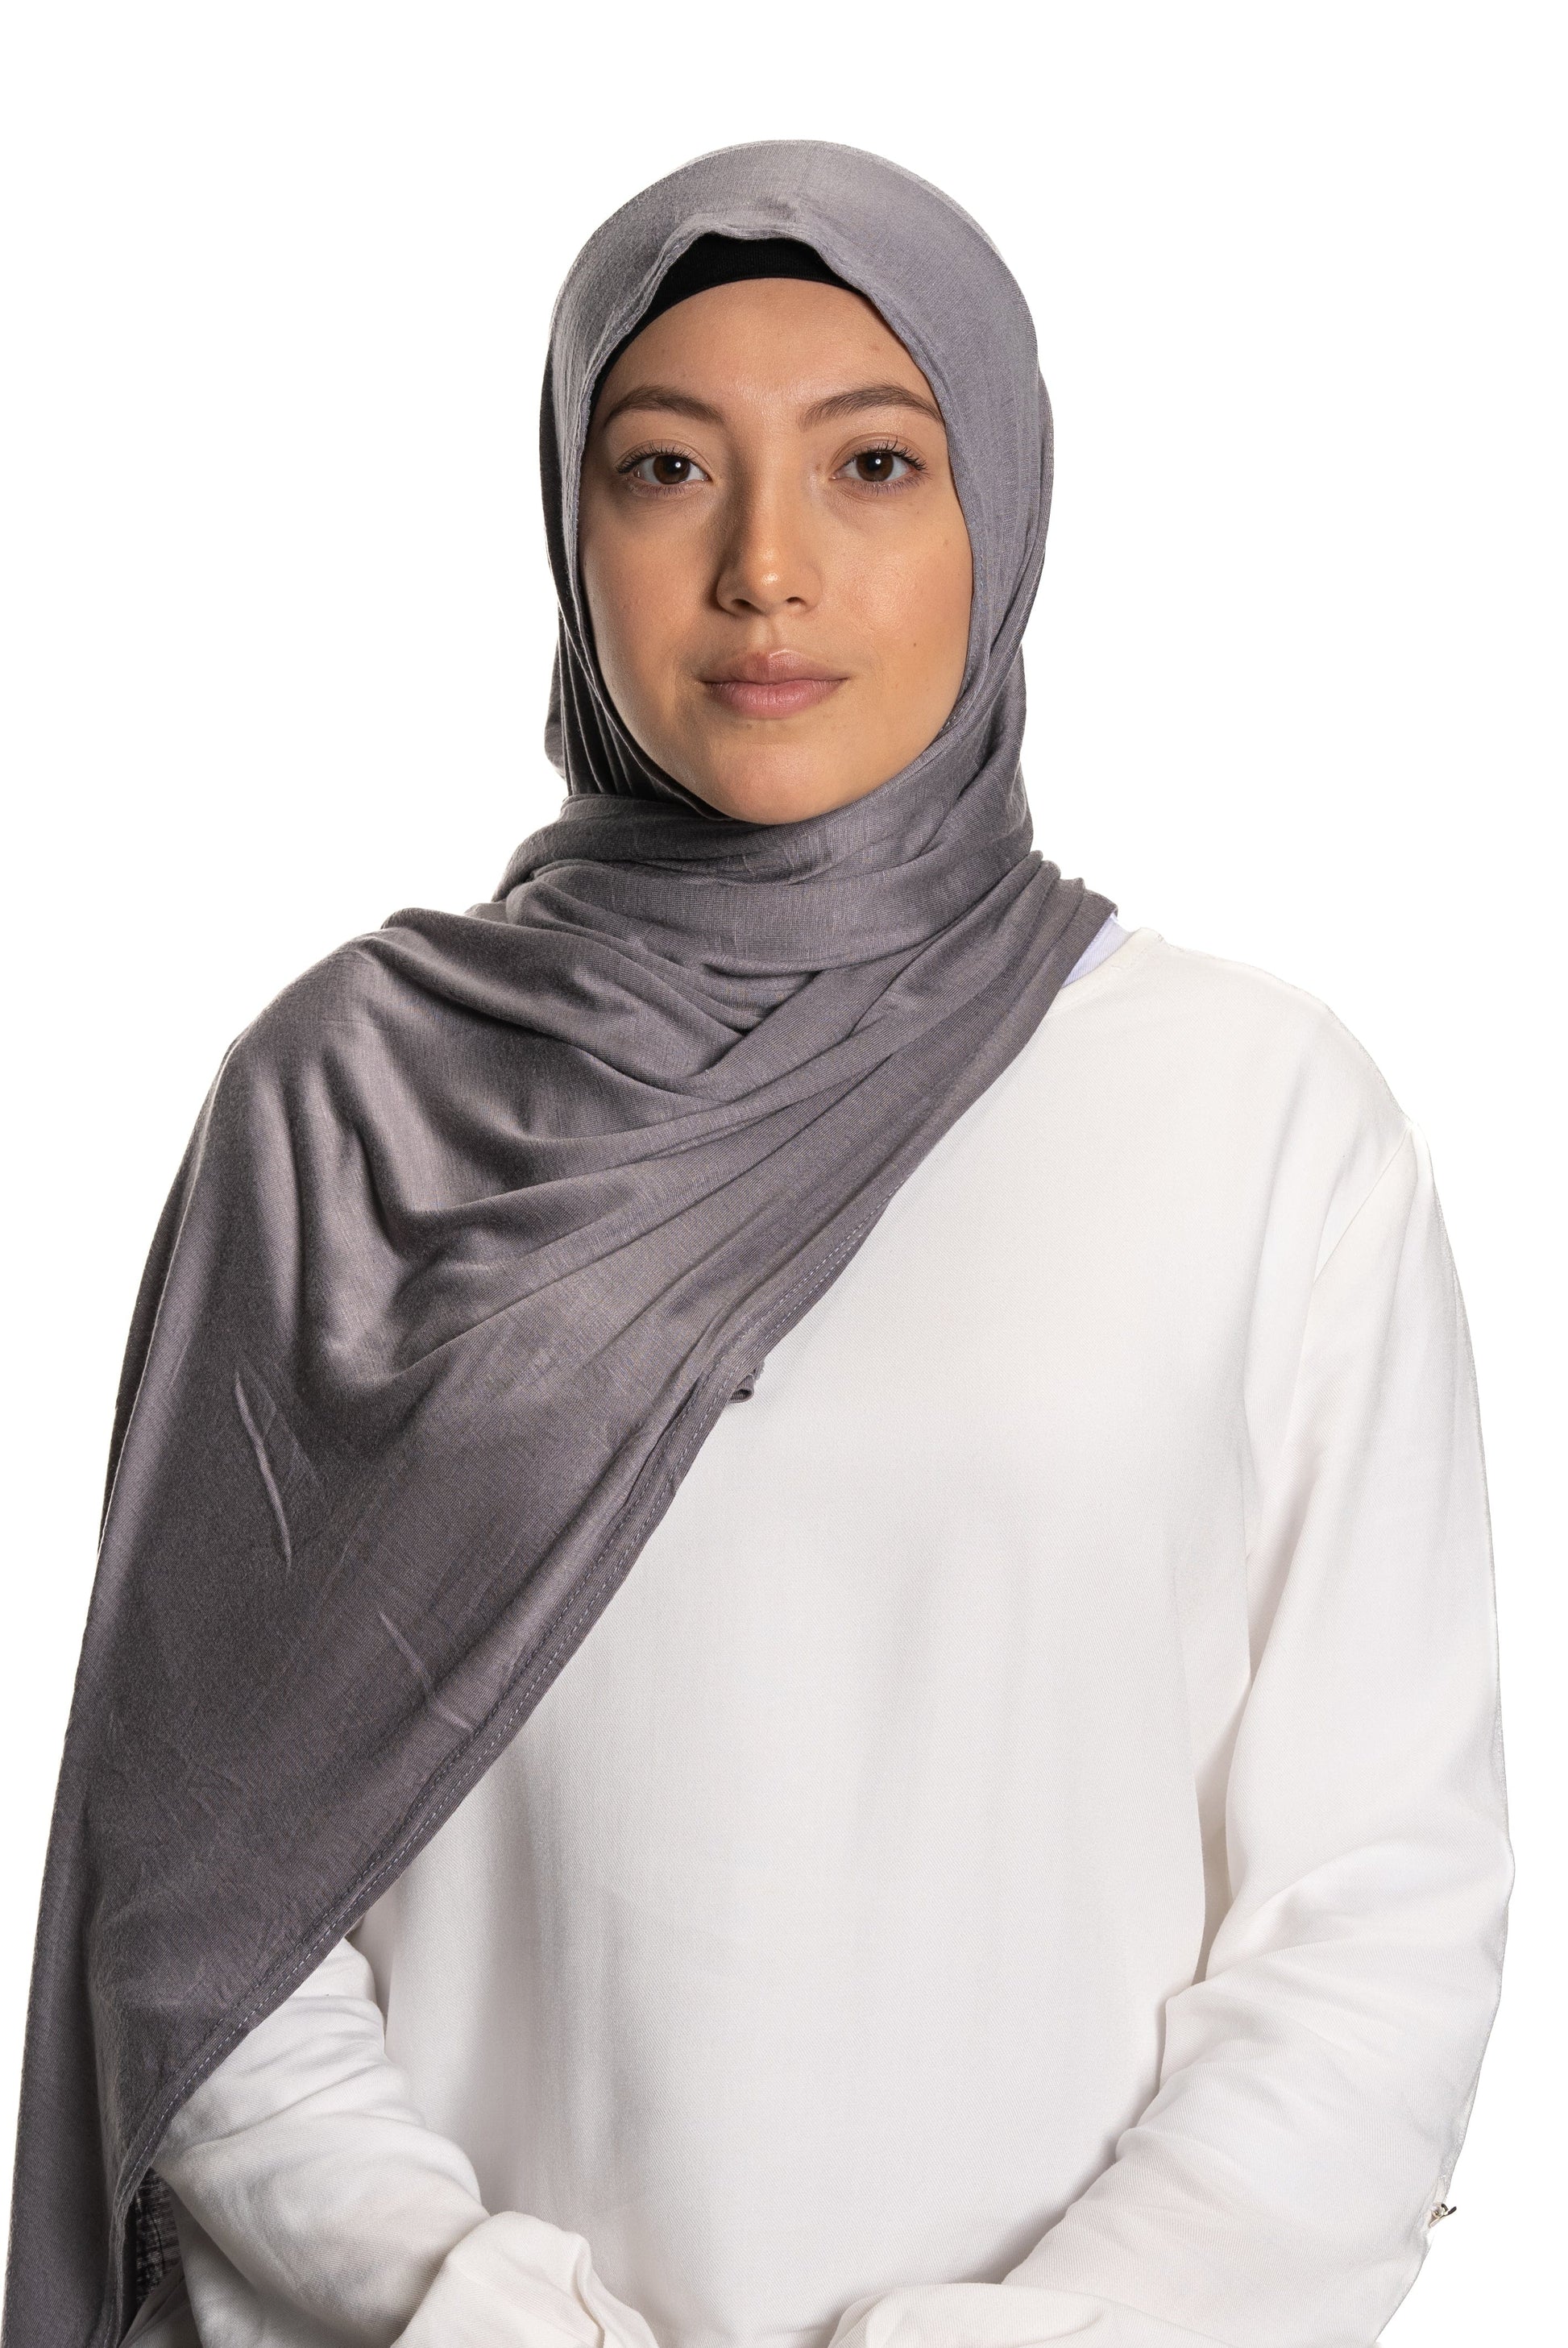 Jolie Nisa Hijab Grey Premium Slip-on Jersey Instant Head Scarf Wrap for Effortless and Stylish Hijab Wear Premium Slip-on instant Jersey Head Scarf Wrap for Effortless and Stylish Hijab Wear!